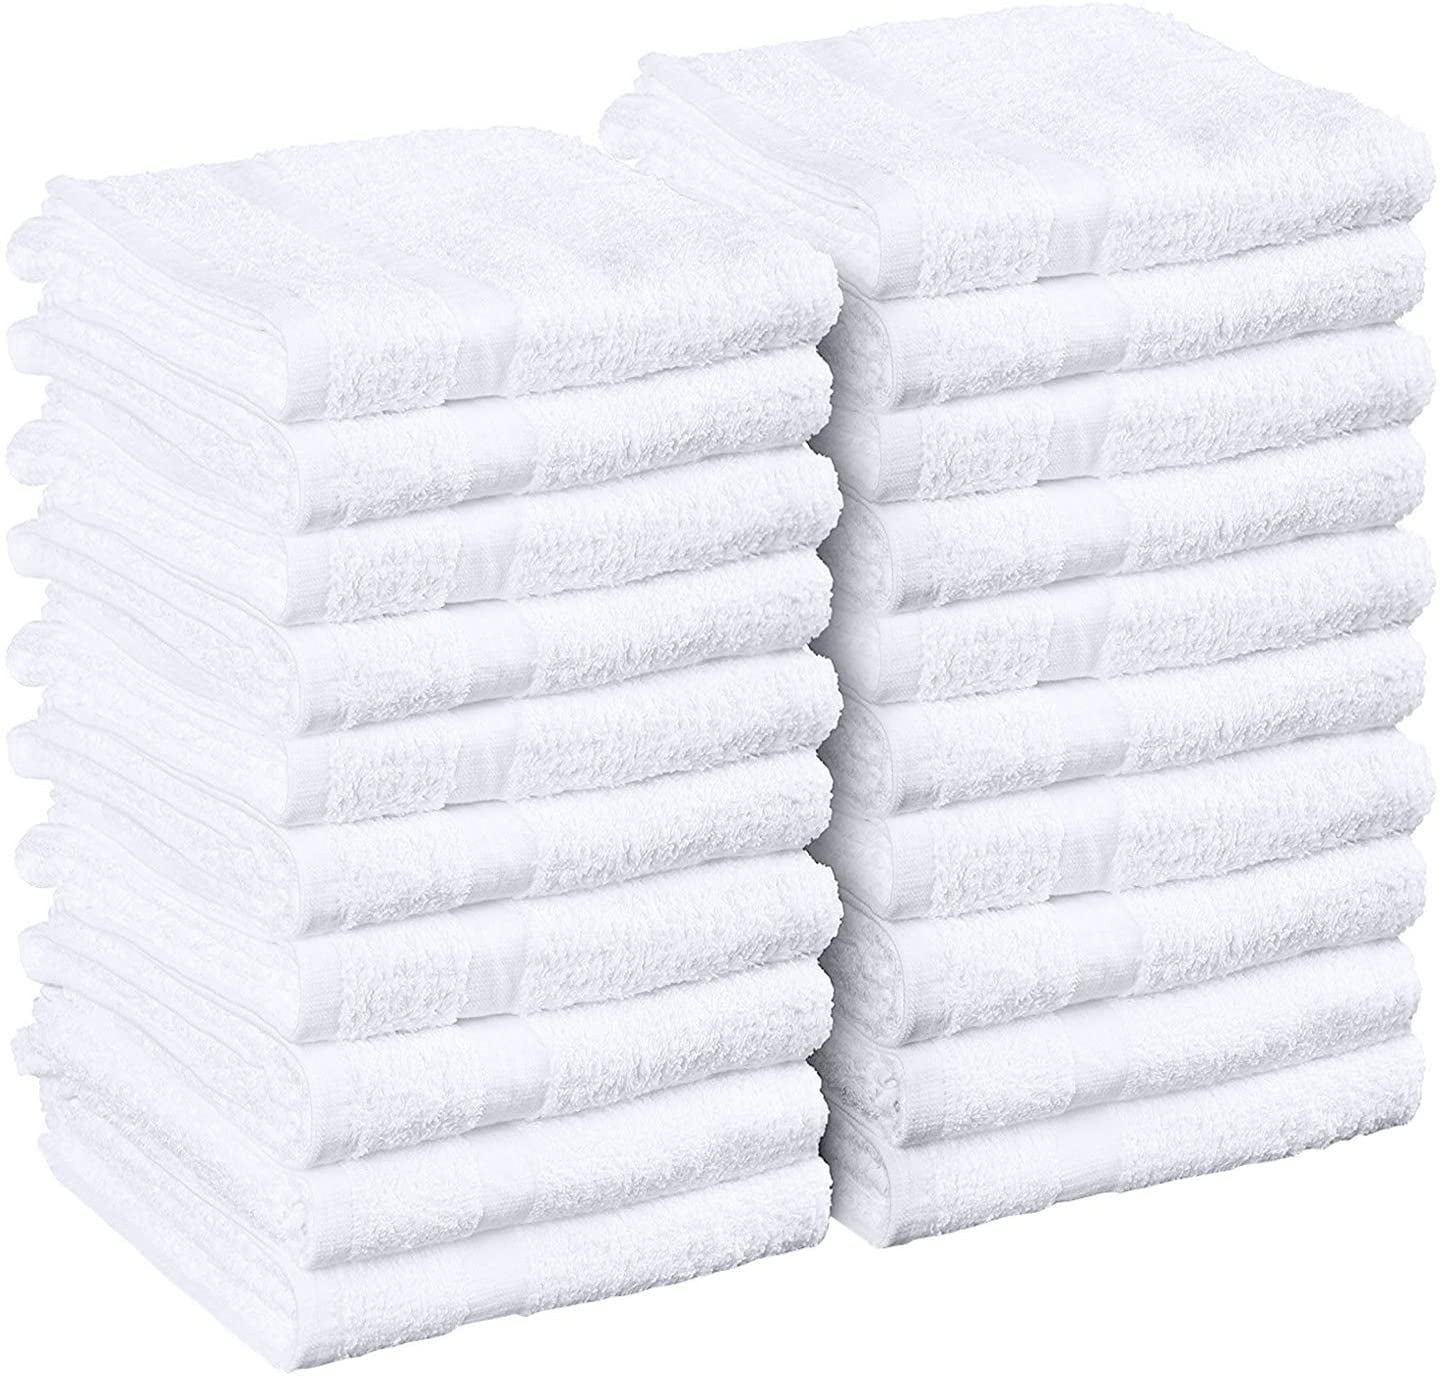 Personal Touch White Basic Cotton Hand Towels, 12-Pack 